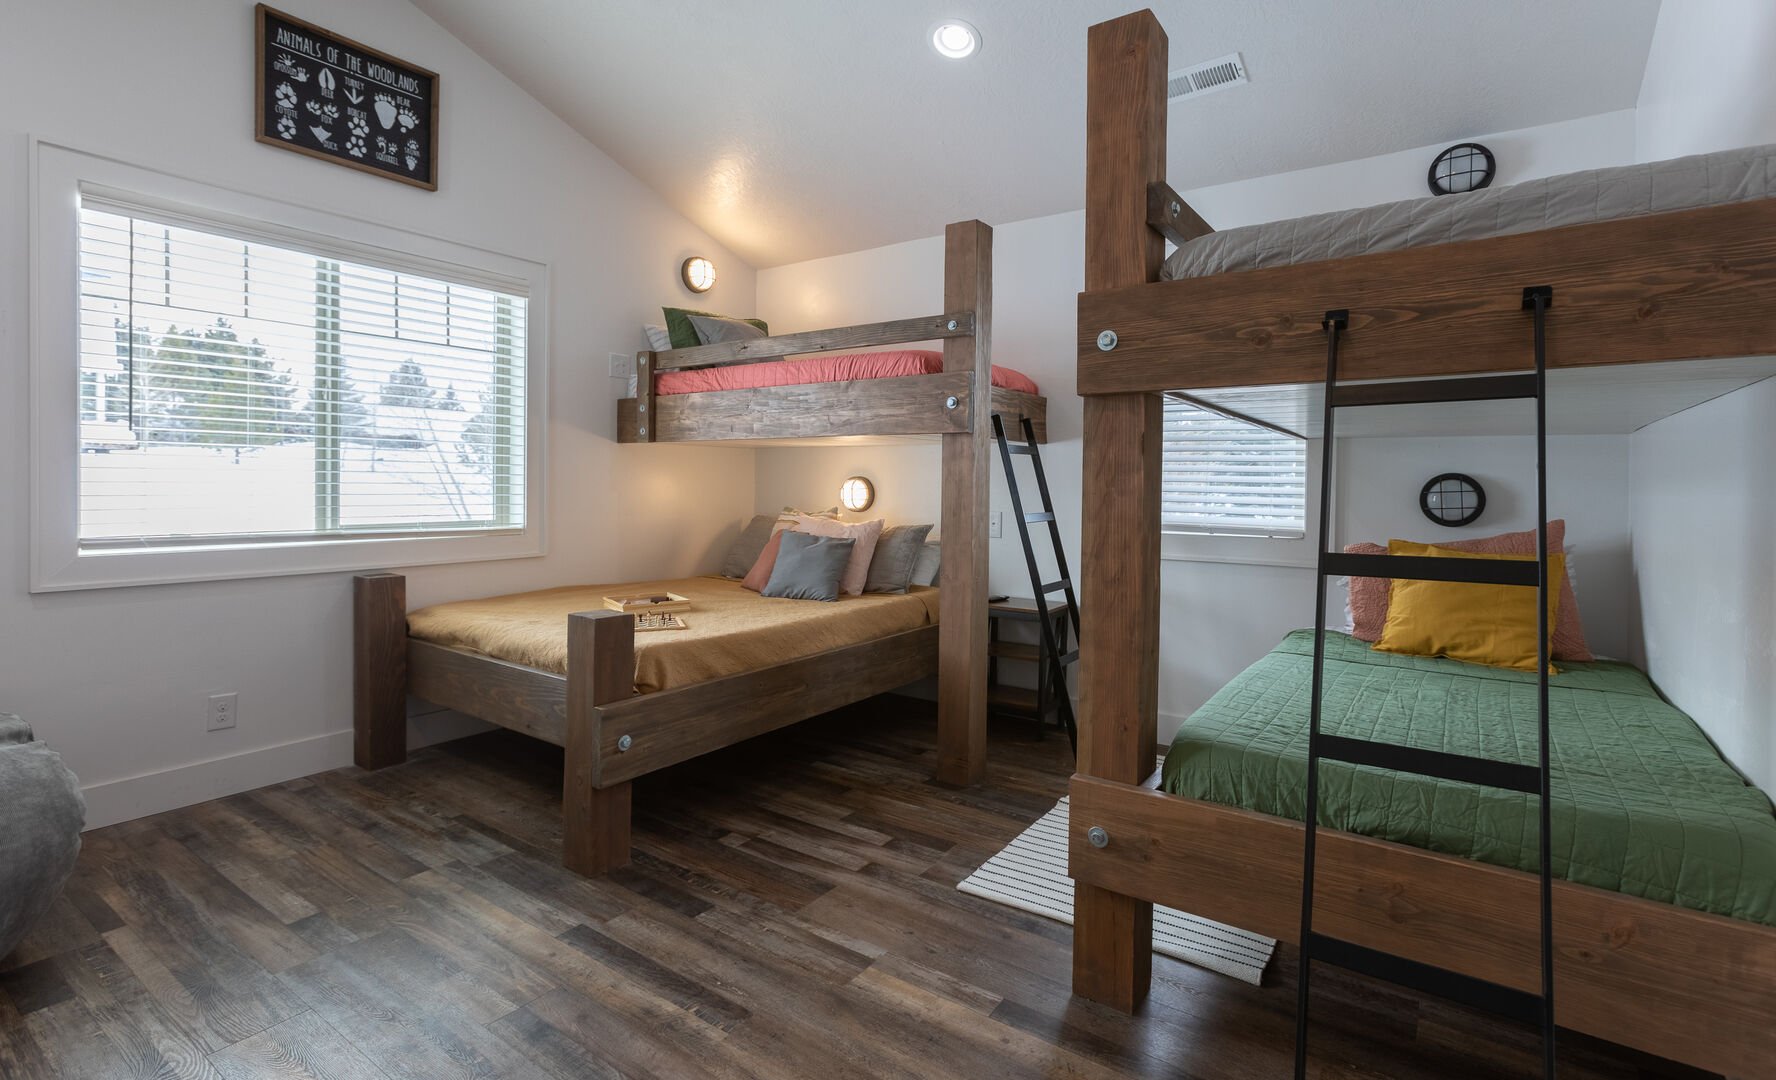 Cast Iron Moose ~ loft on upper level w/ single/single and single/queen bunk beds and Smart TV (considering this bedroom #4)